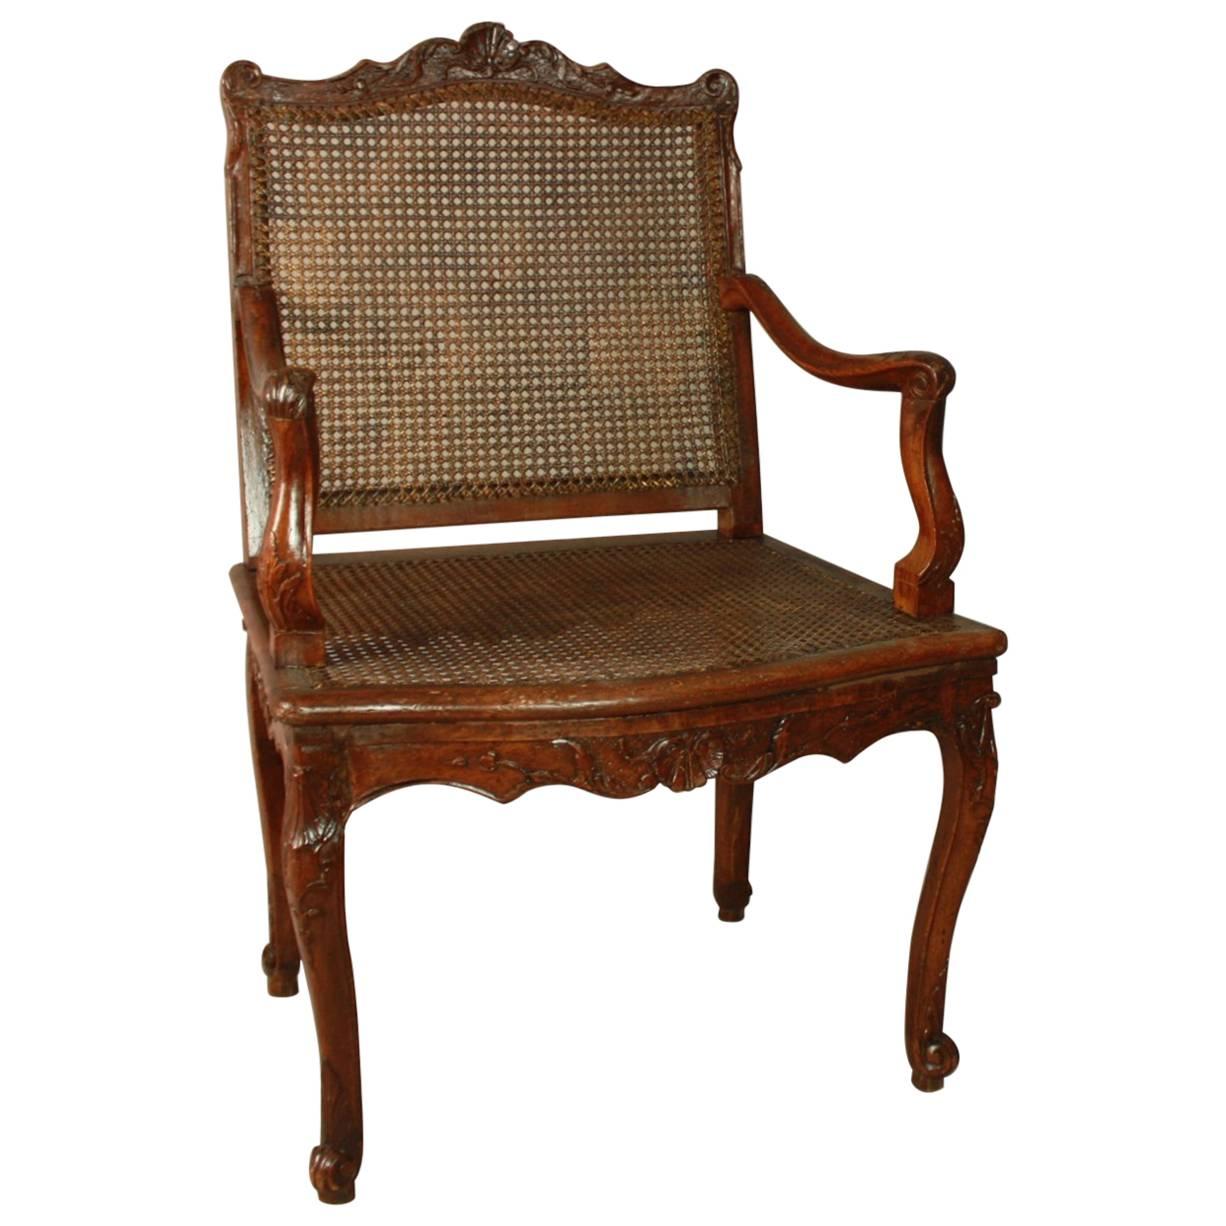 Regence Carved and Caned Armchair or Fauteuil, circa 1720